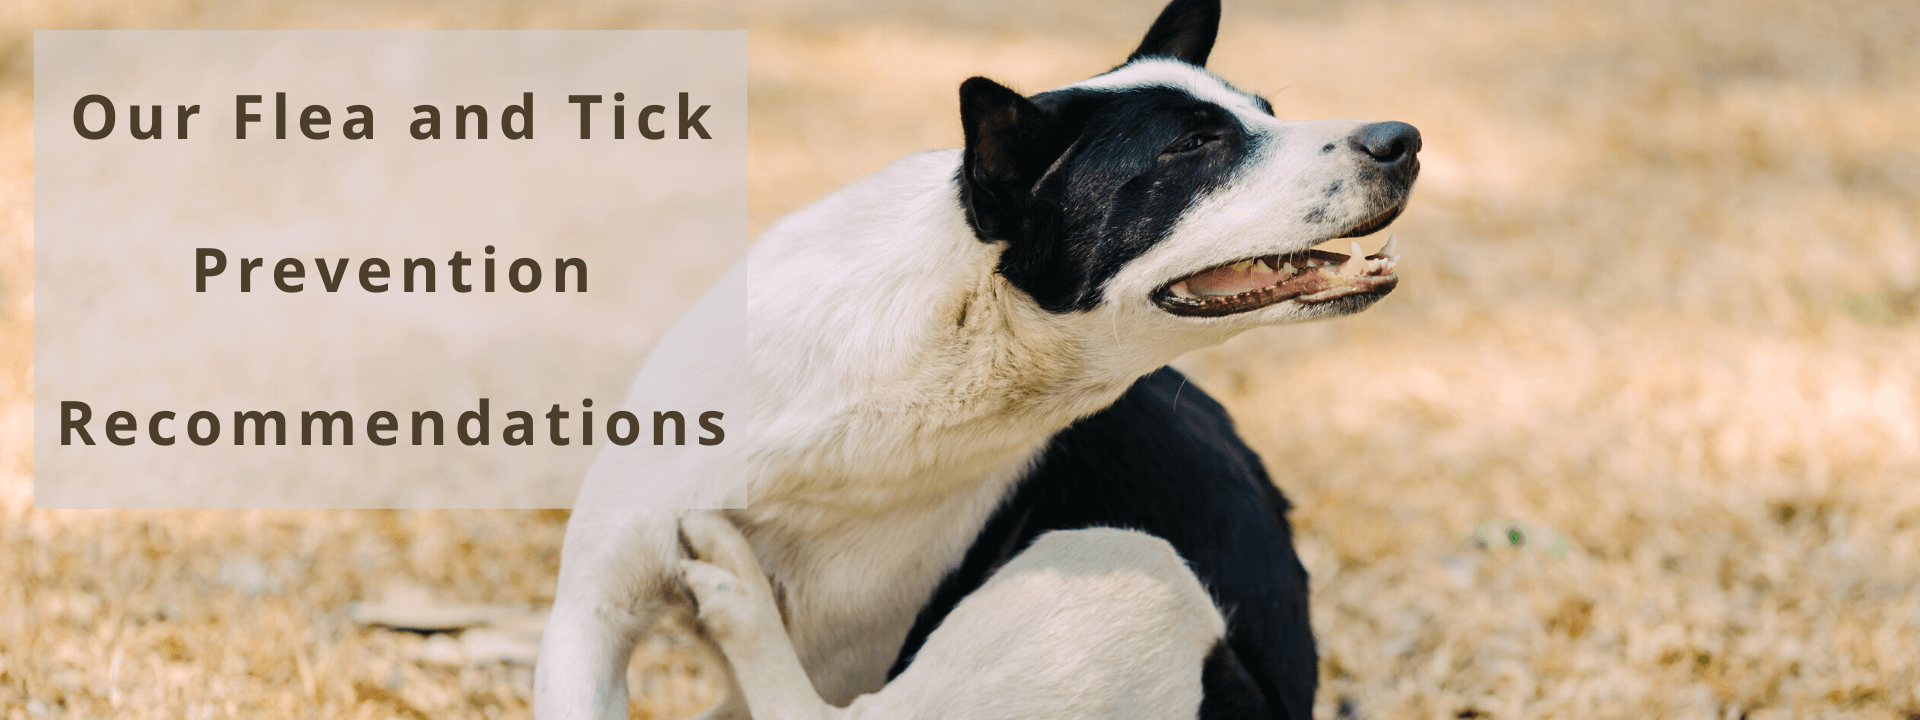 What Flea and Tick Medications Do We Recommend